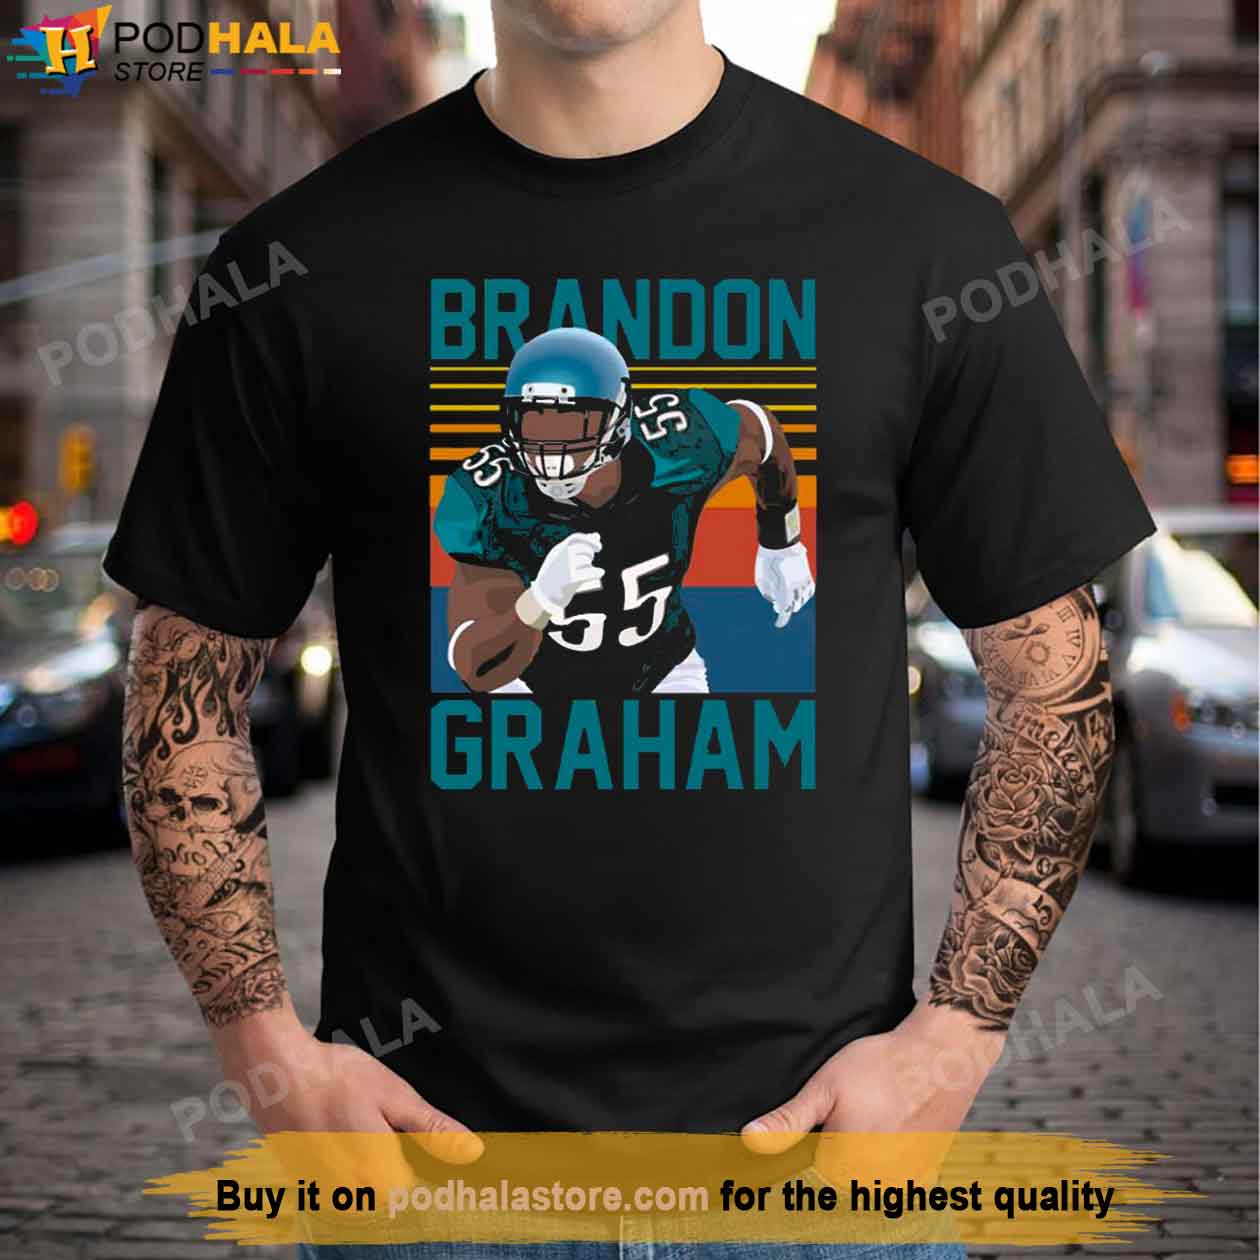 Brandon Graham Super Bowl Philadelphia Eagles Vintage T Shirt - Bring Your  Ideas, Thoughts And Imaginations Into Reality Today